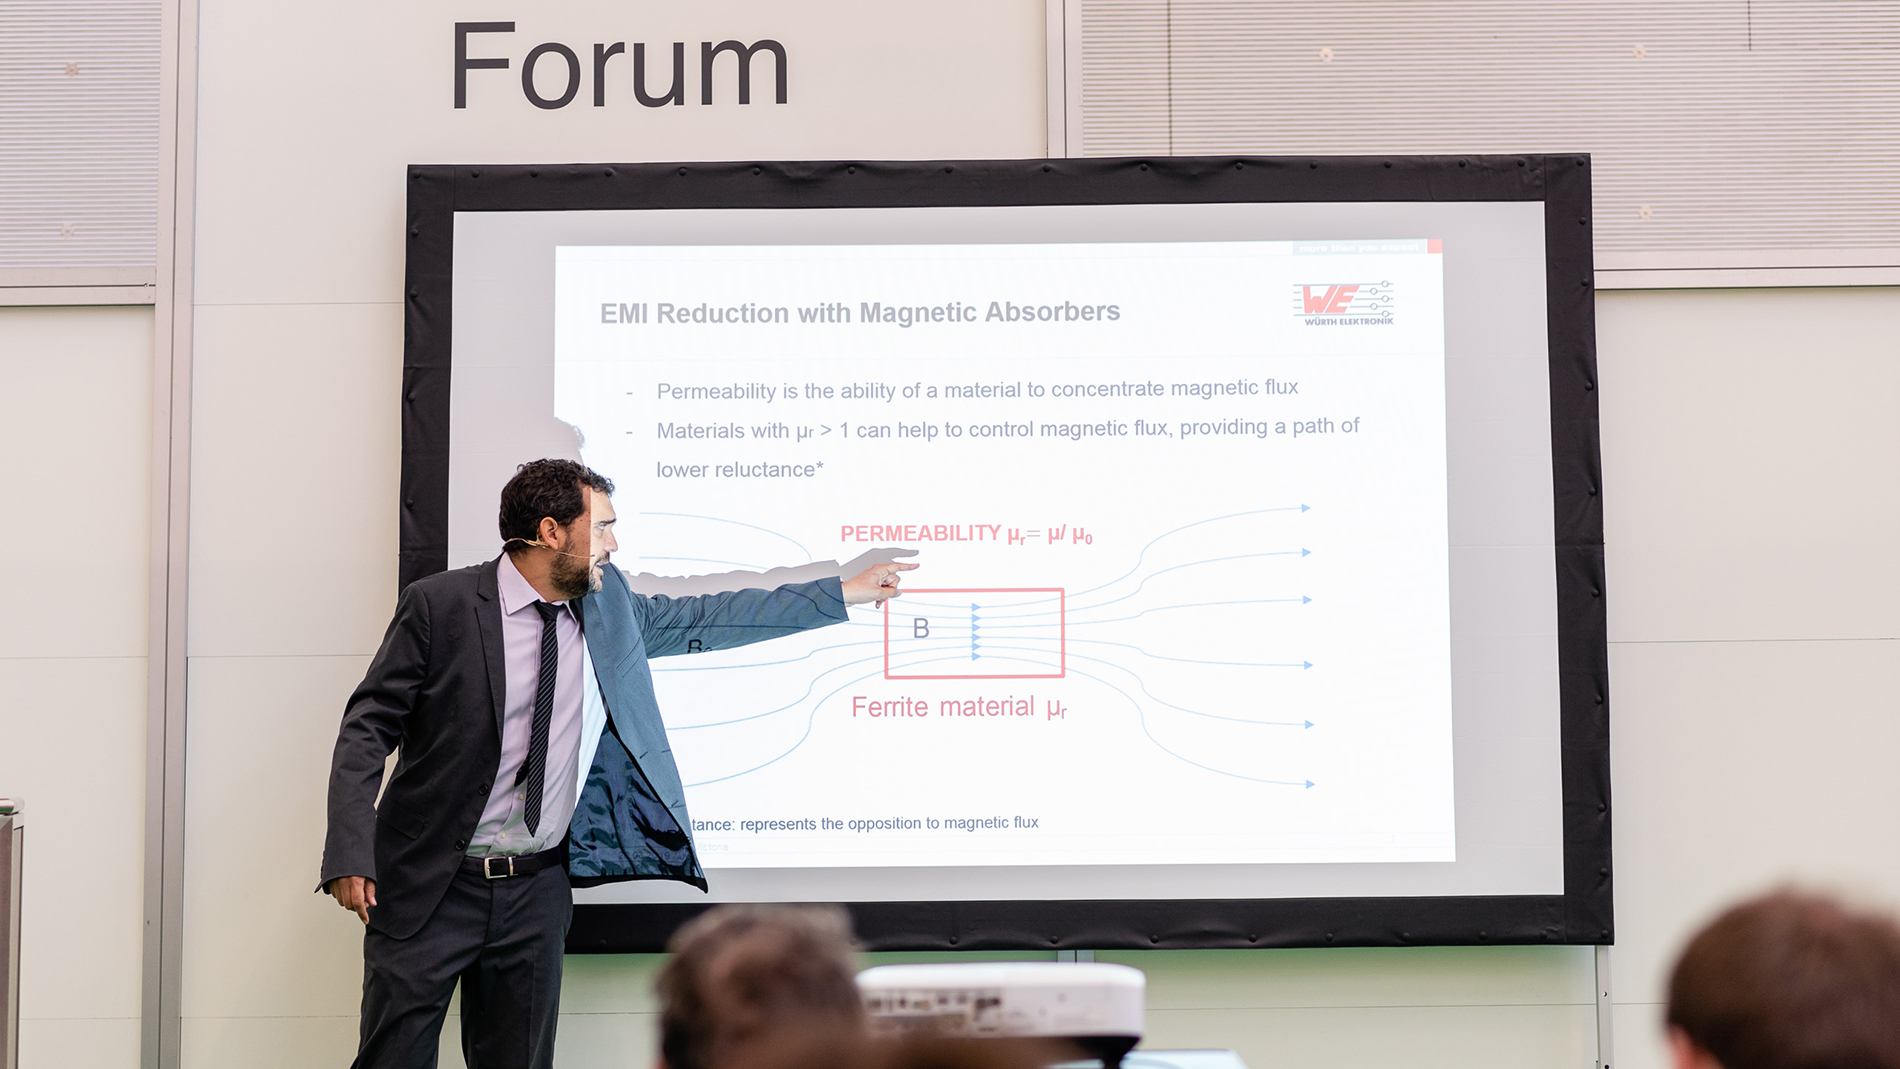 Jorge Victoria, Würth Elektronik eiSos GmbH & Co. KG, on "EMI reduction with magnetic absorbers"